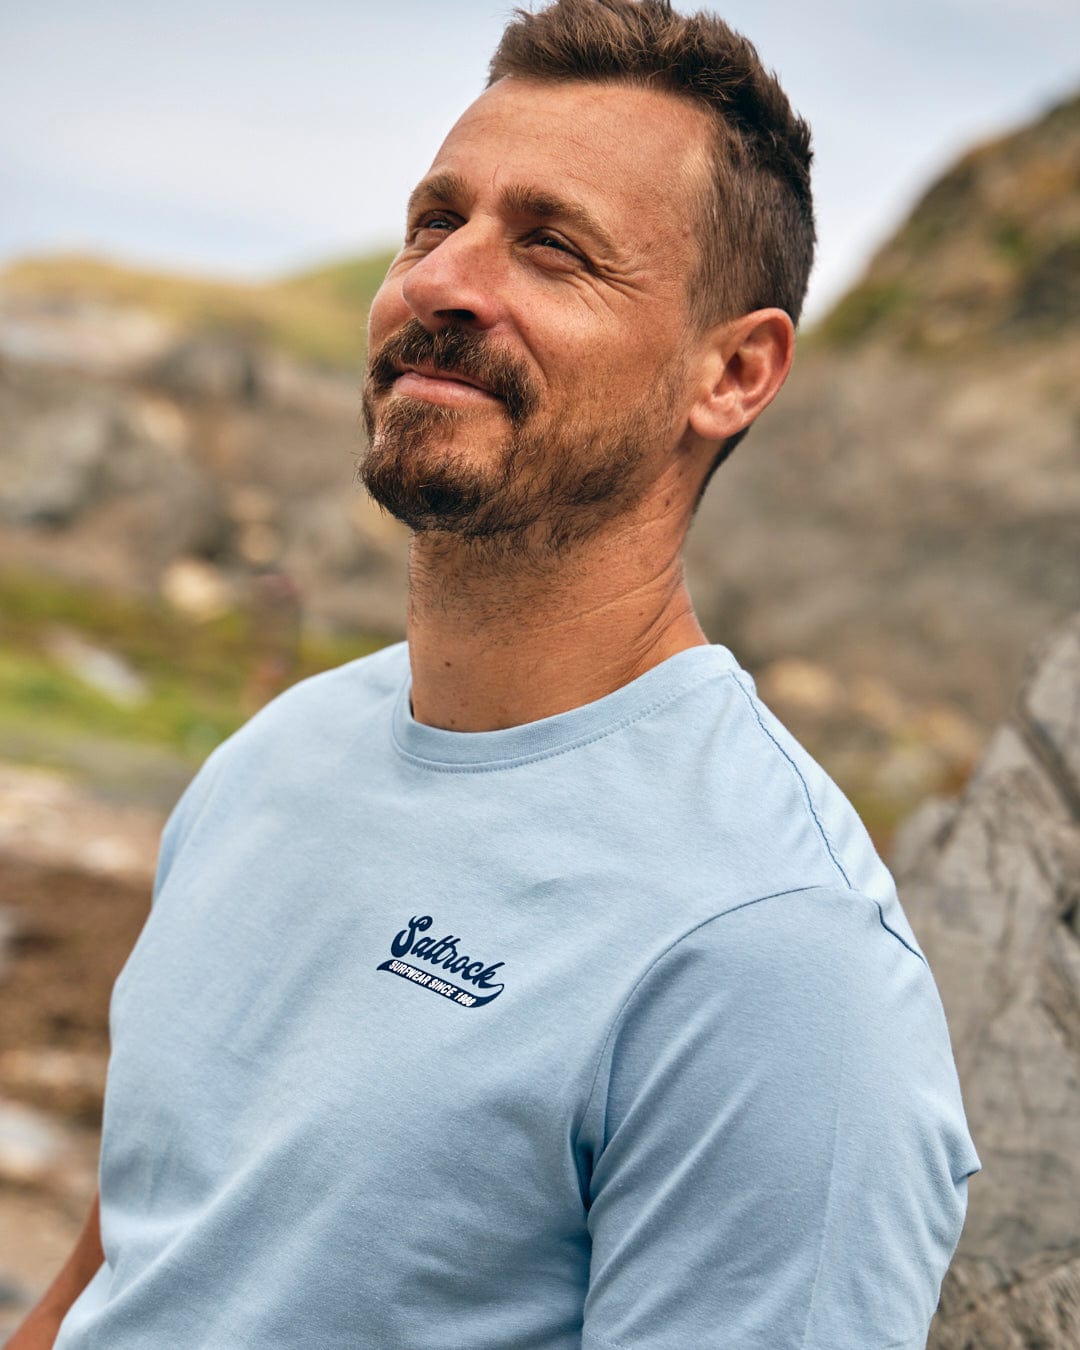 A man with short hair and a beard smiles while wearing the Home Run - Mens T-Shirt - Blue made by Saltrock, outdoors with rocks and greenery in the background.